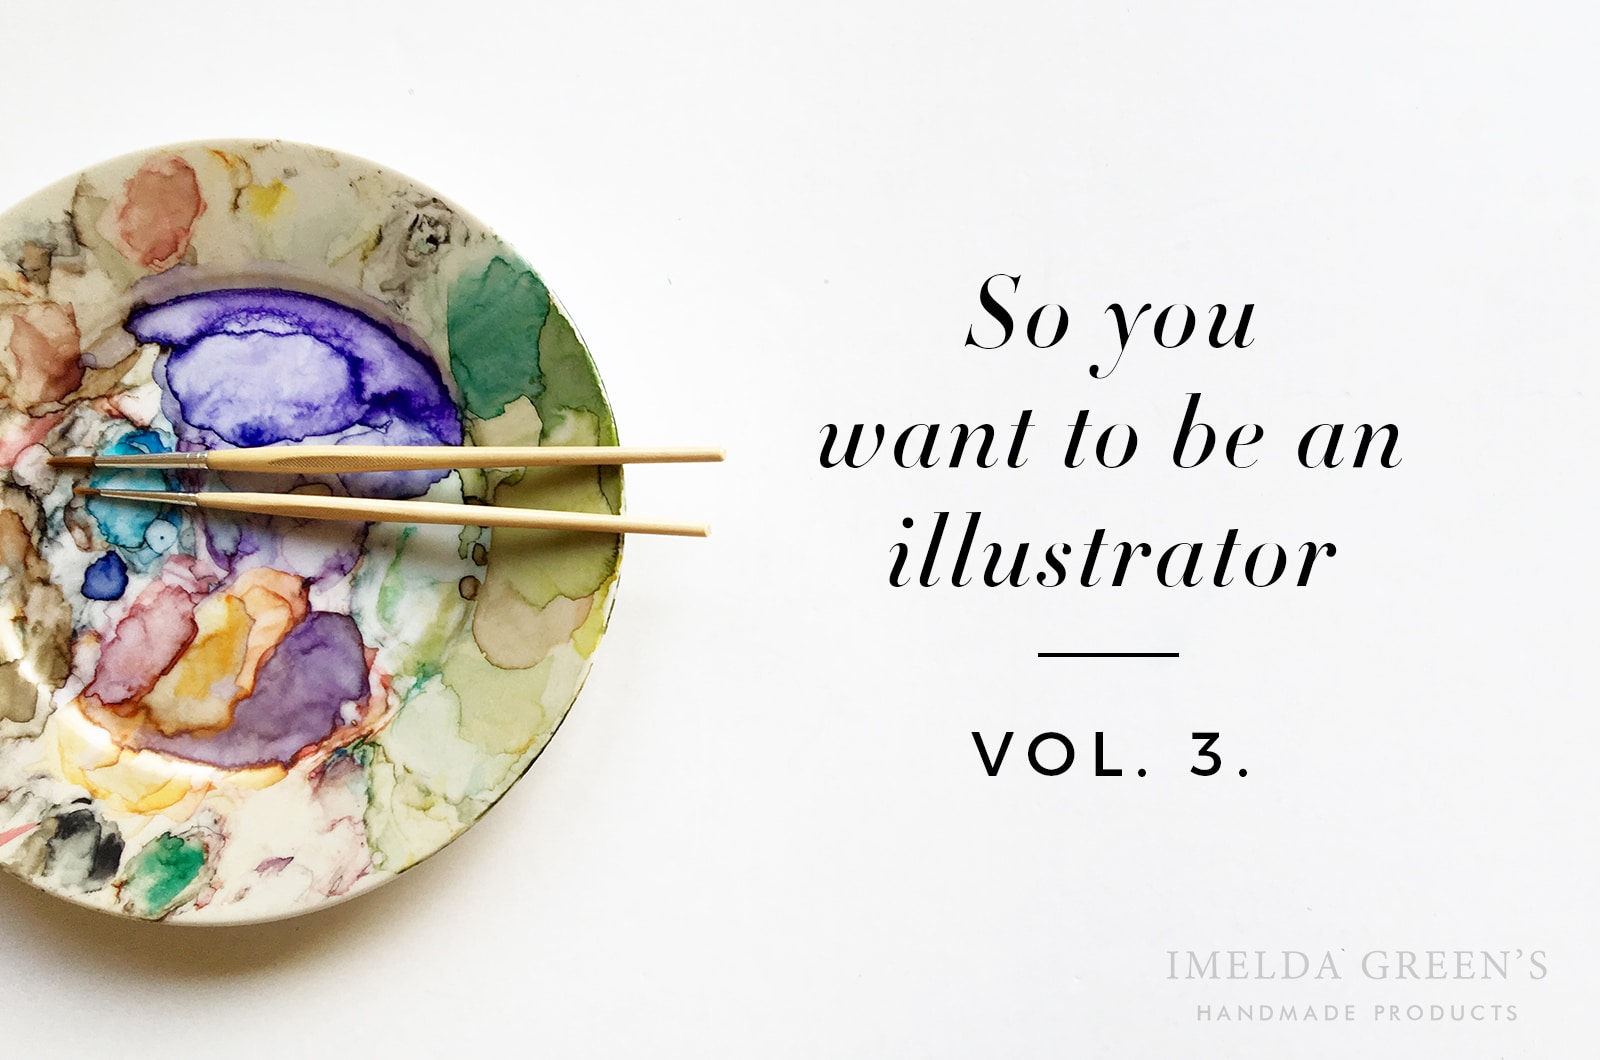 So you want to be an illustrator | Vol. 3 - how to have multiple income streams